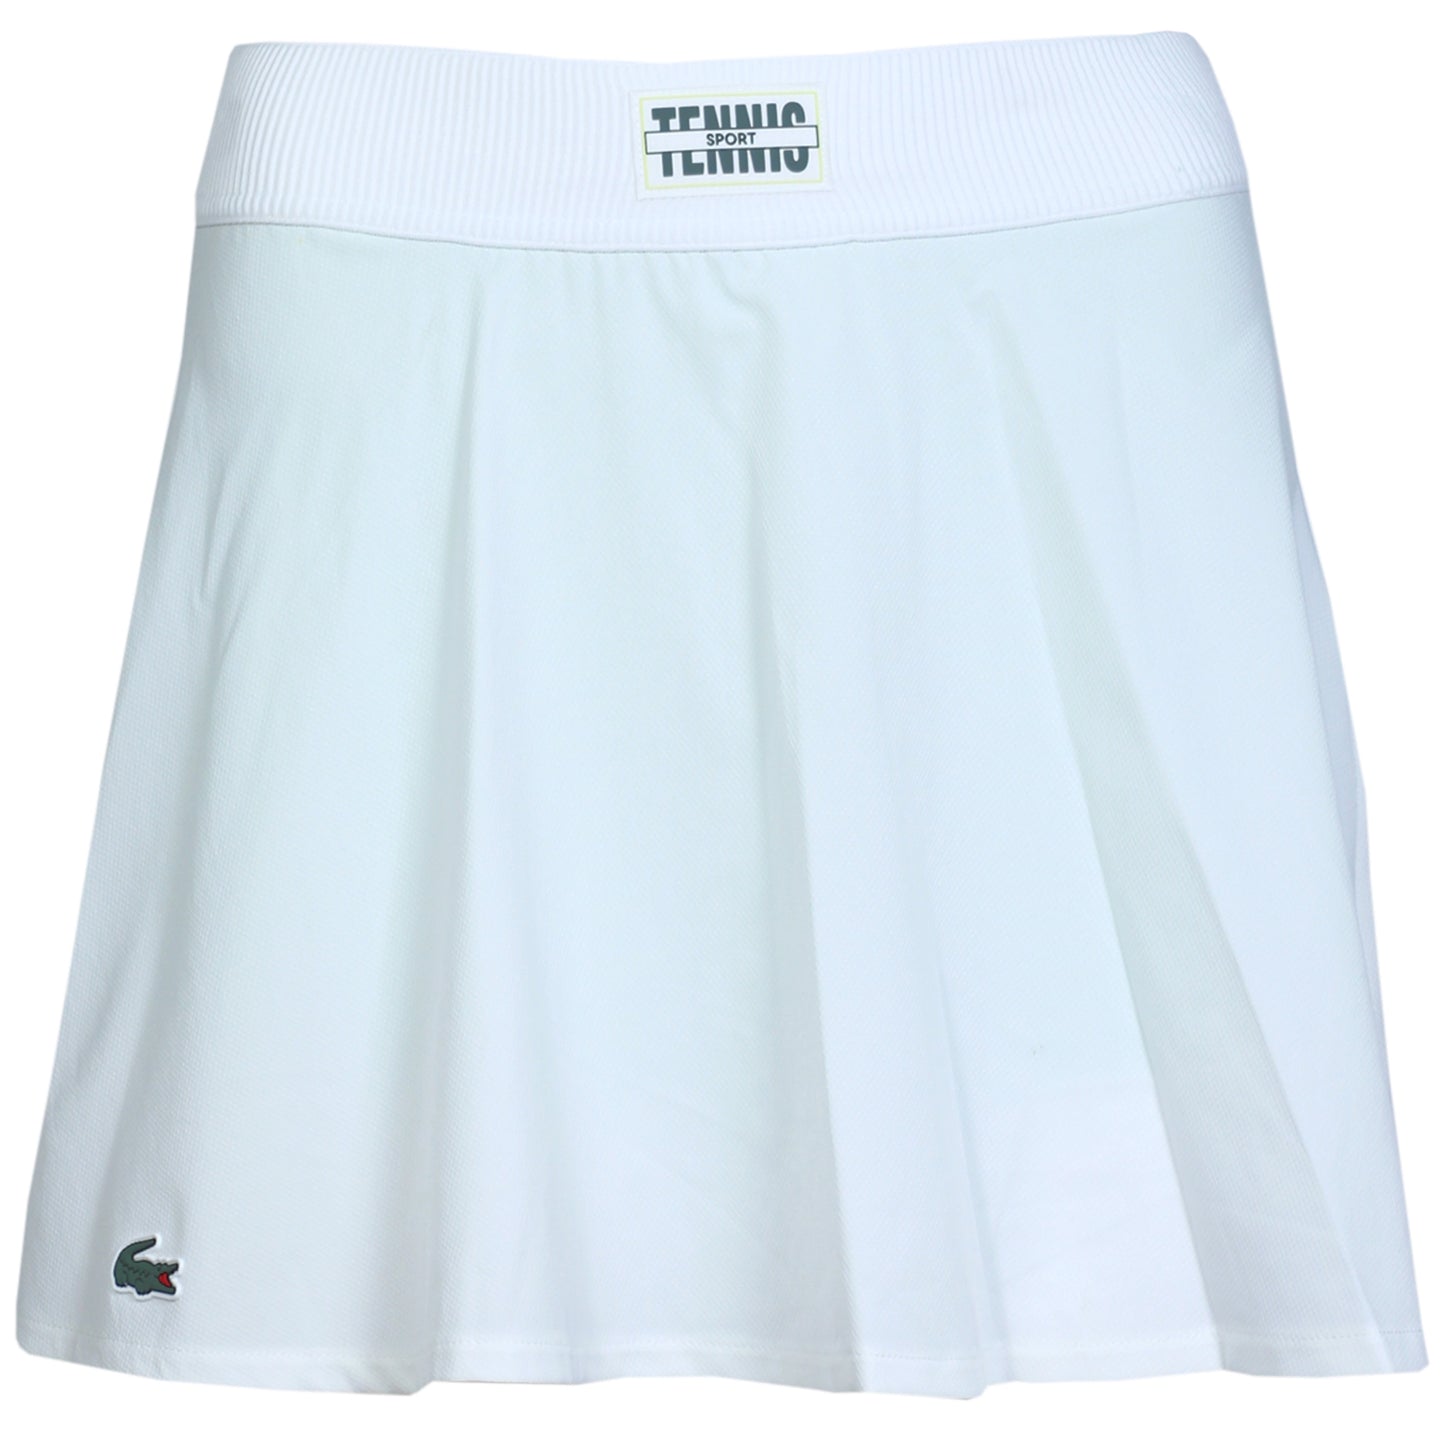 Lacoste Women's Pleated Skirt JF1035-52-PI2